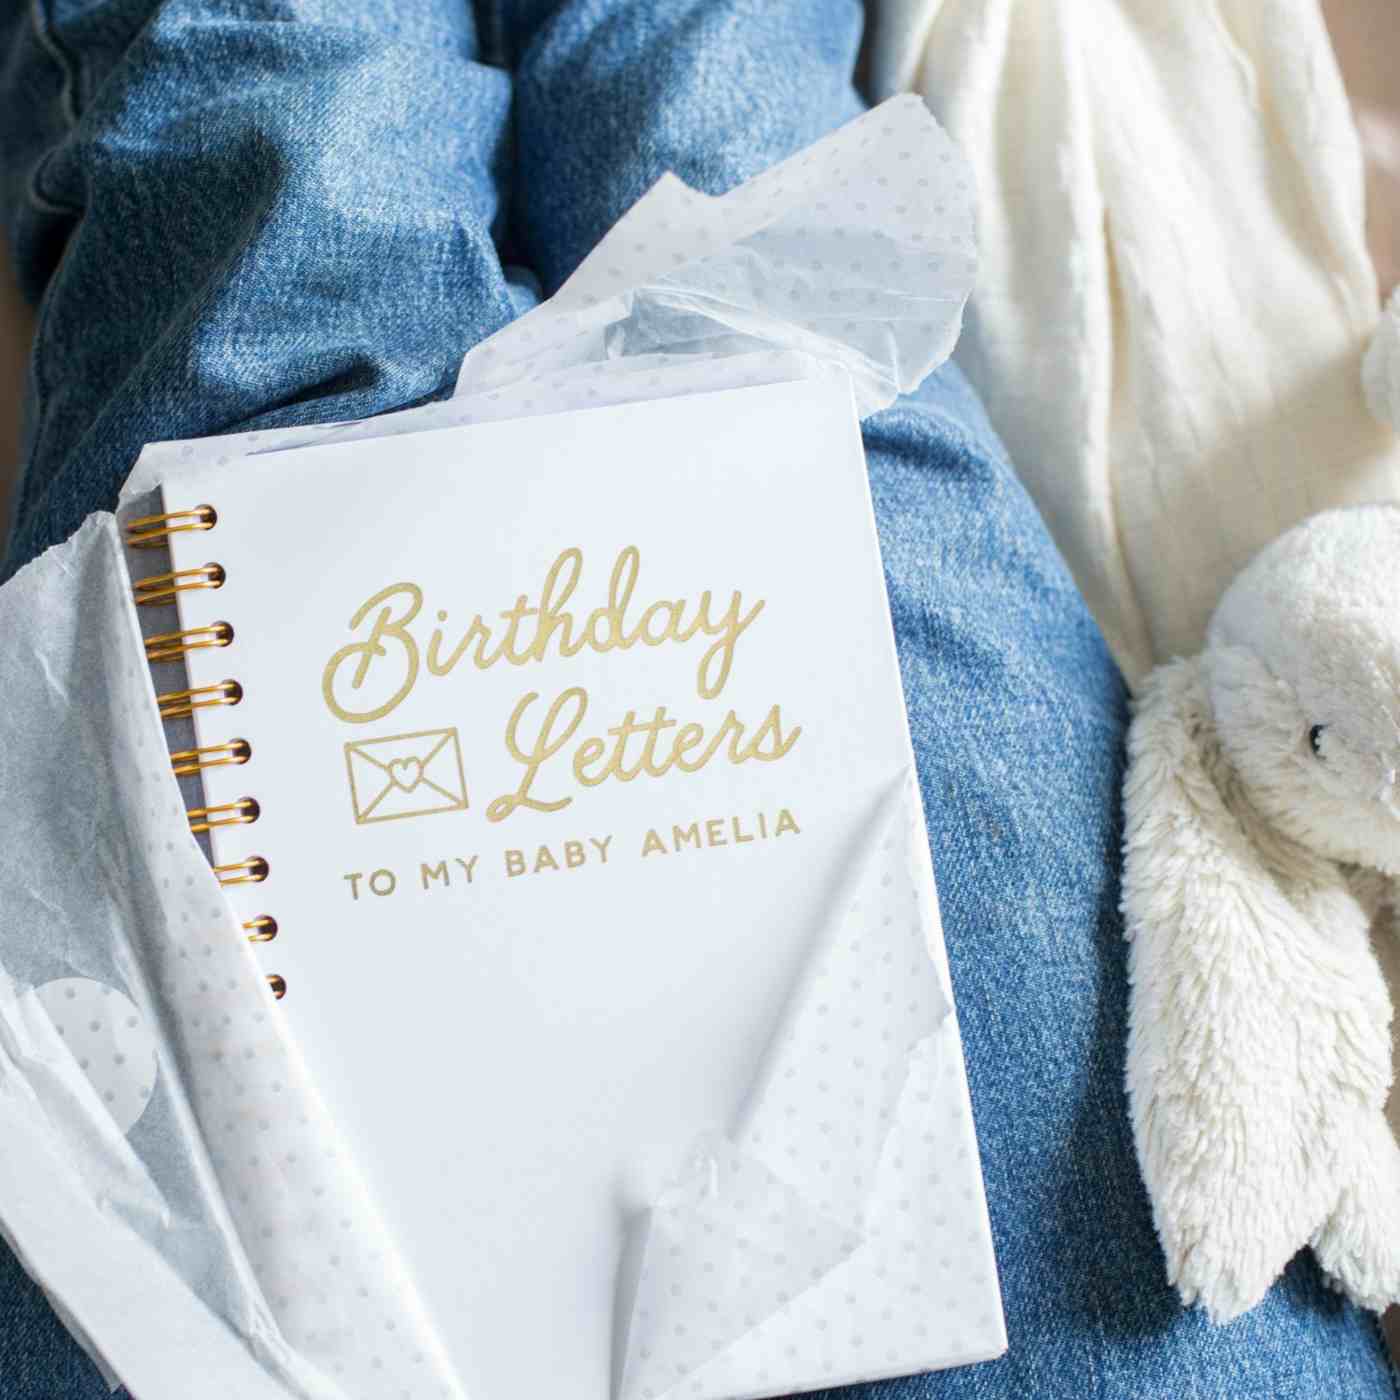 Diary or yearbook for the mother of the child to write beautiful moments